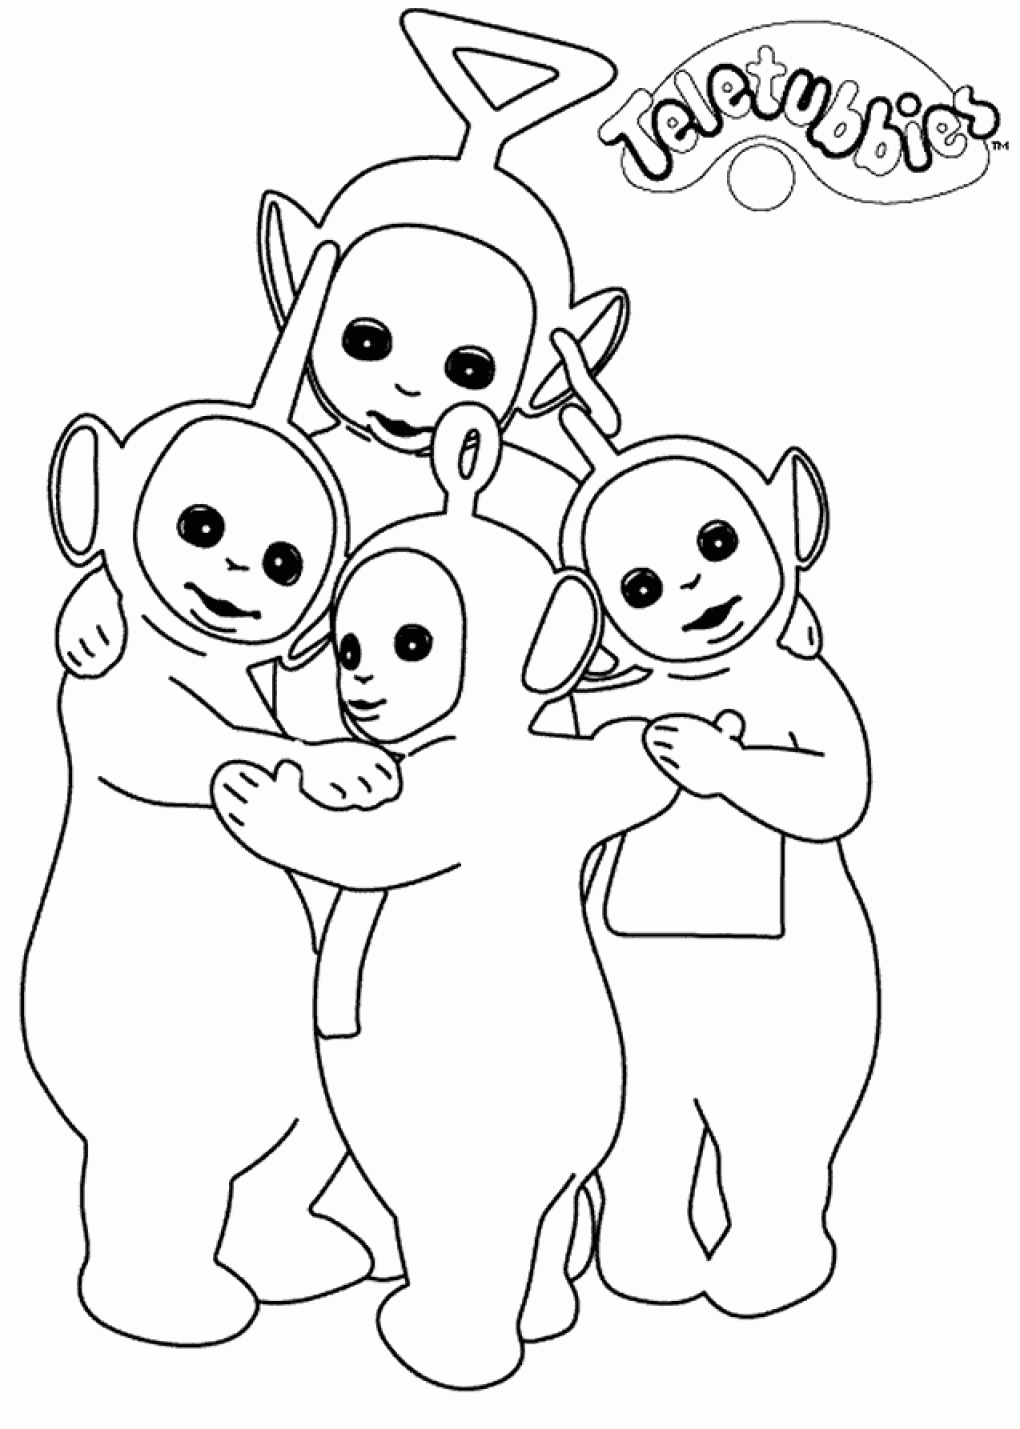 Download Free Printable Teletubbies Coloring Pages For Kids